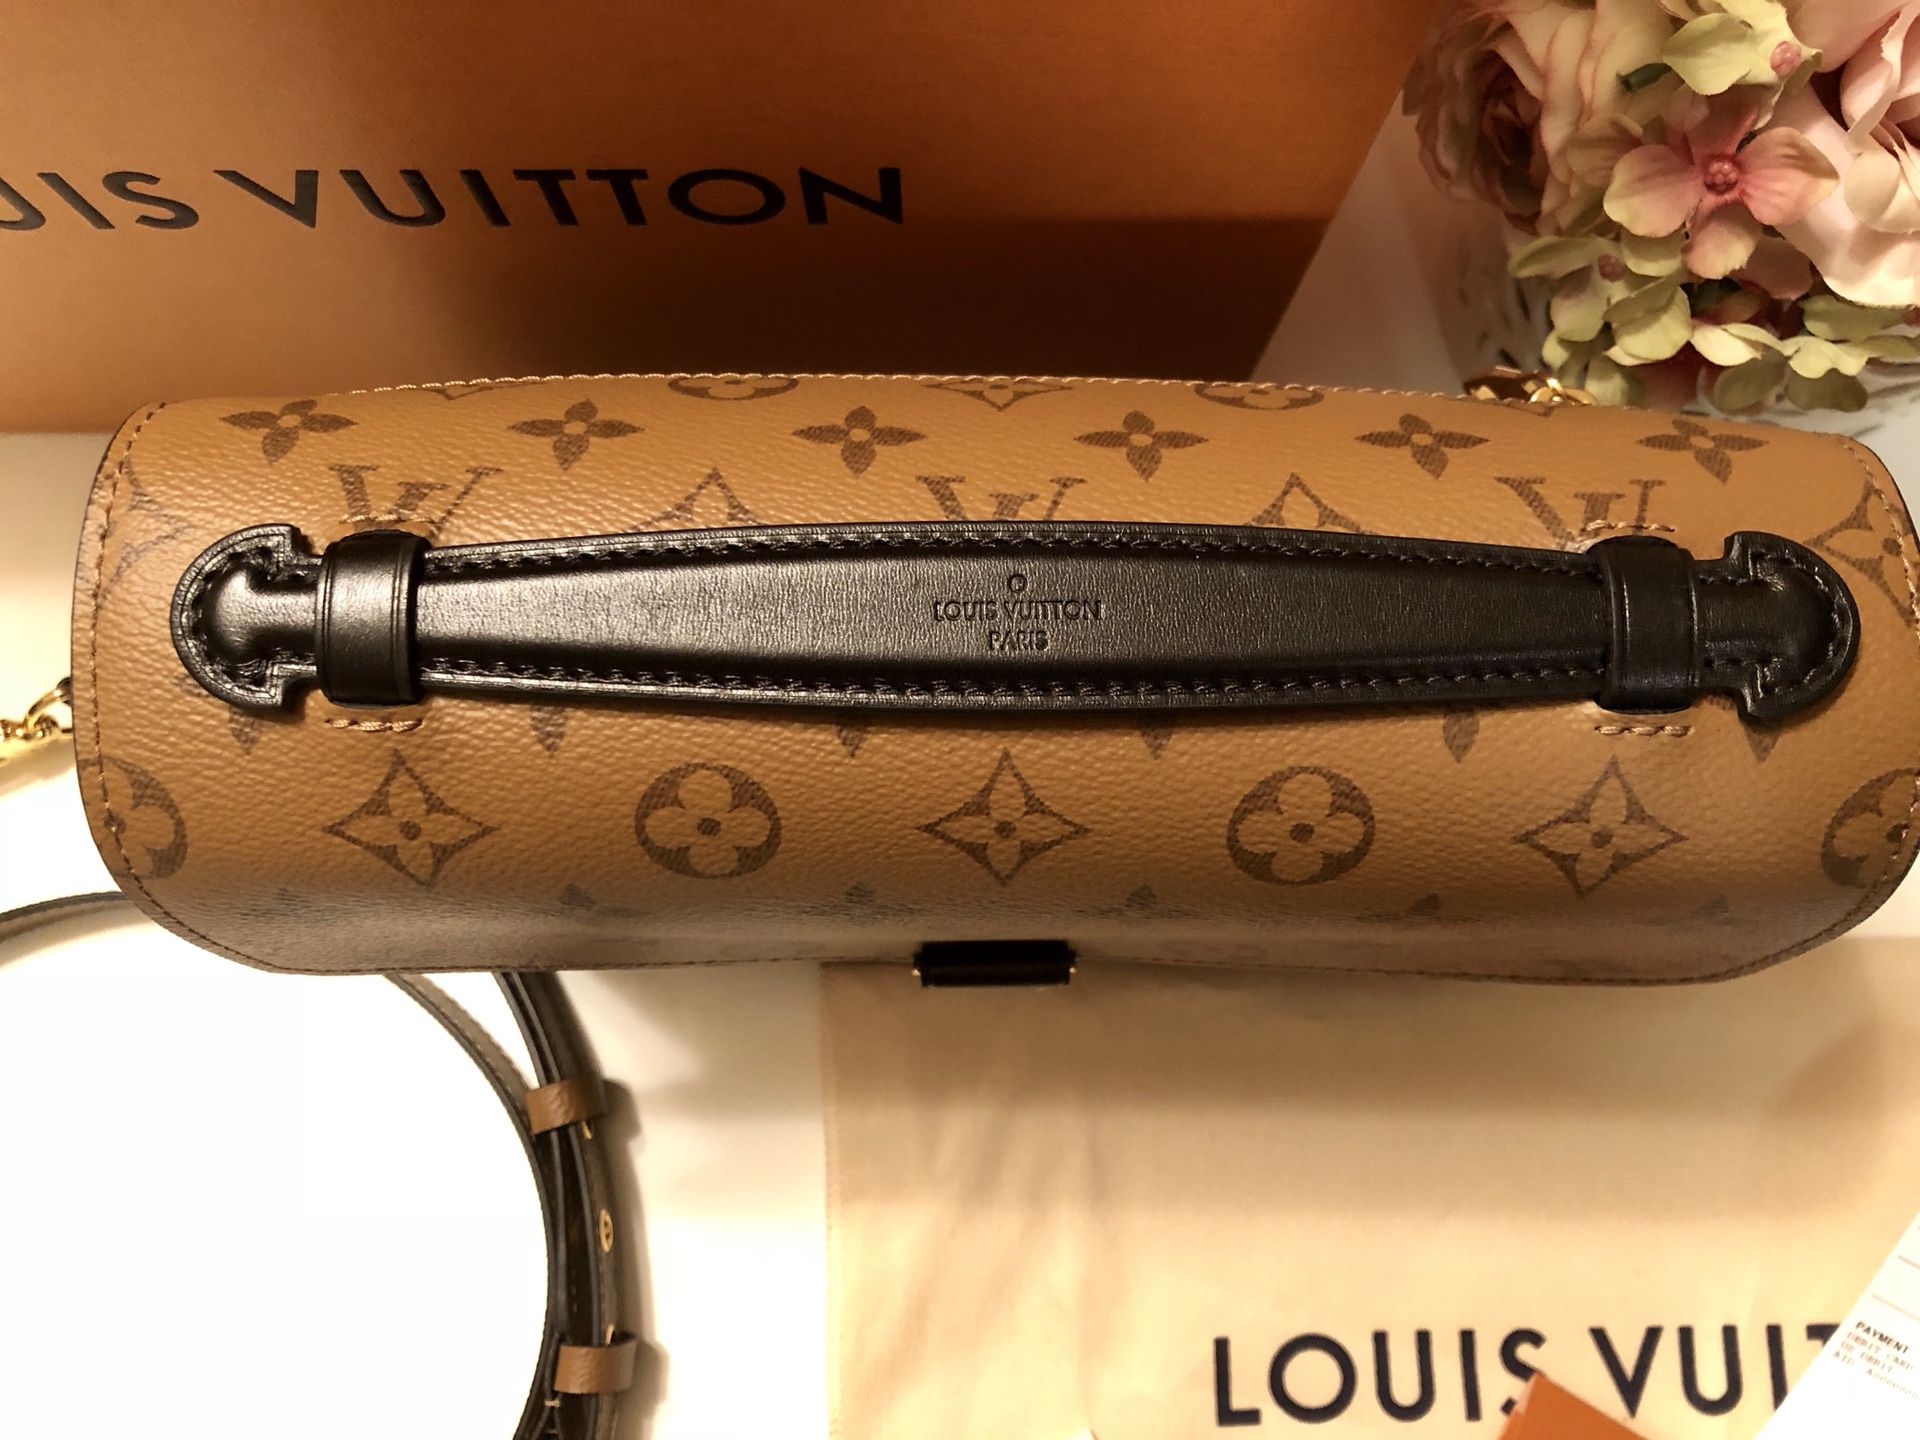 Louis Vuitton Pochette metis reverse for Sale in Daly City, CA - OfferUp